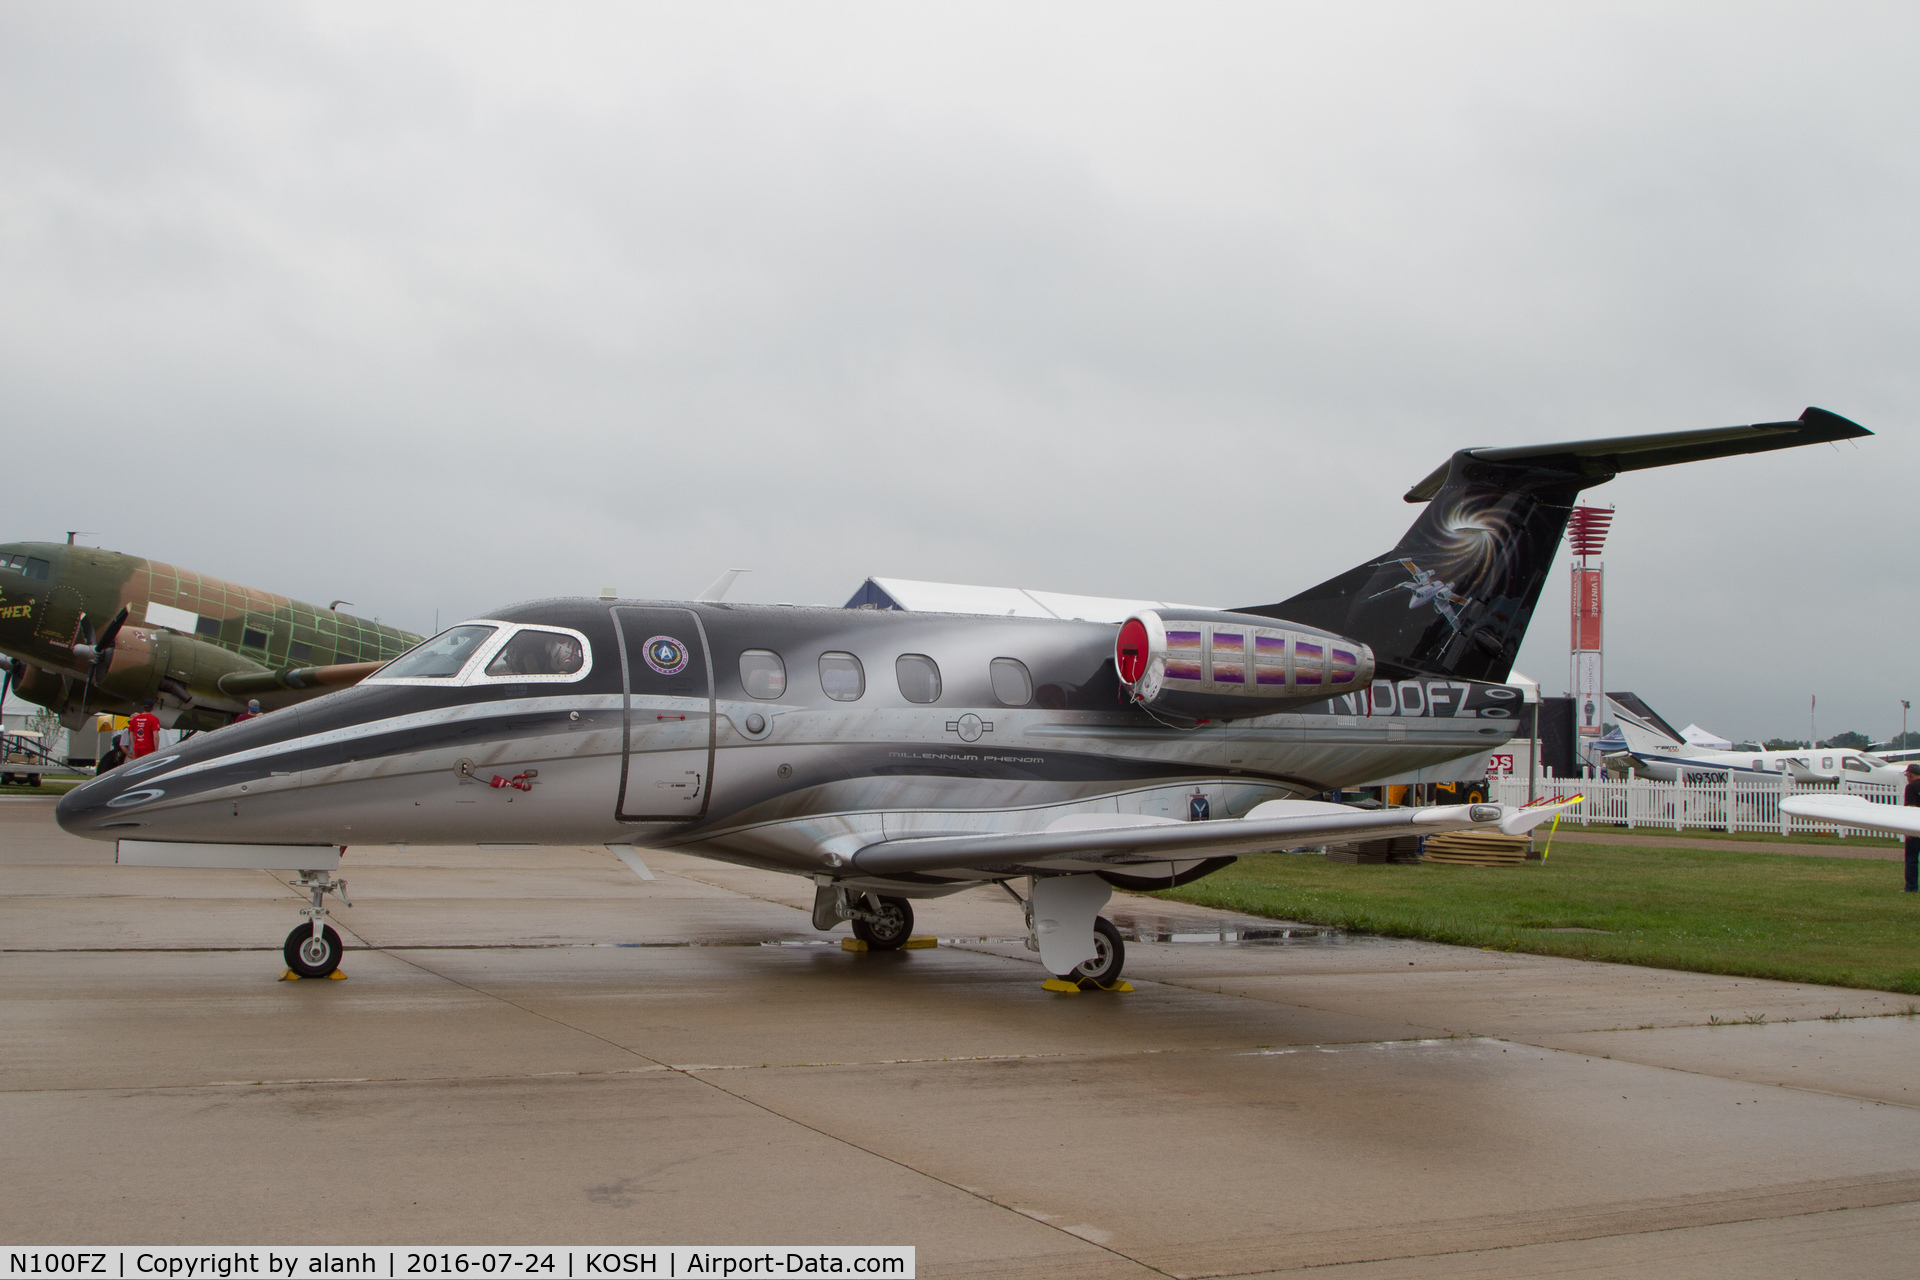 N100FZ, 2010 Embraer EMB-500 Phenom 100 C/N 50000137, At AirVenture 2016 with a Star Wars custom paint job and Millenium Phenom titles